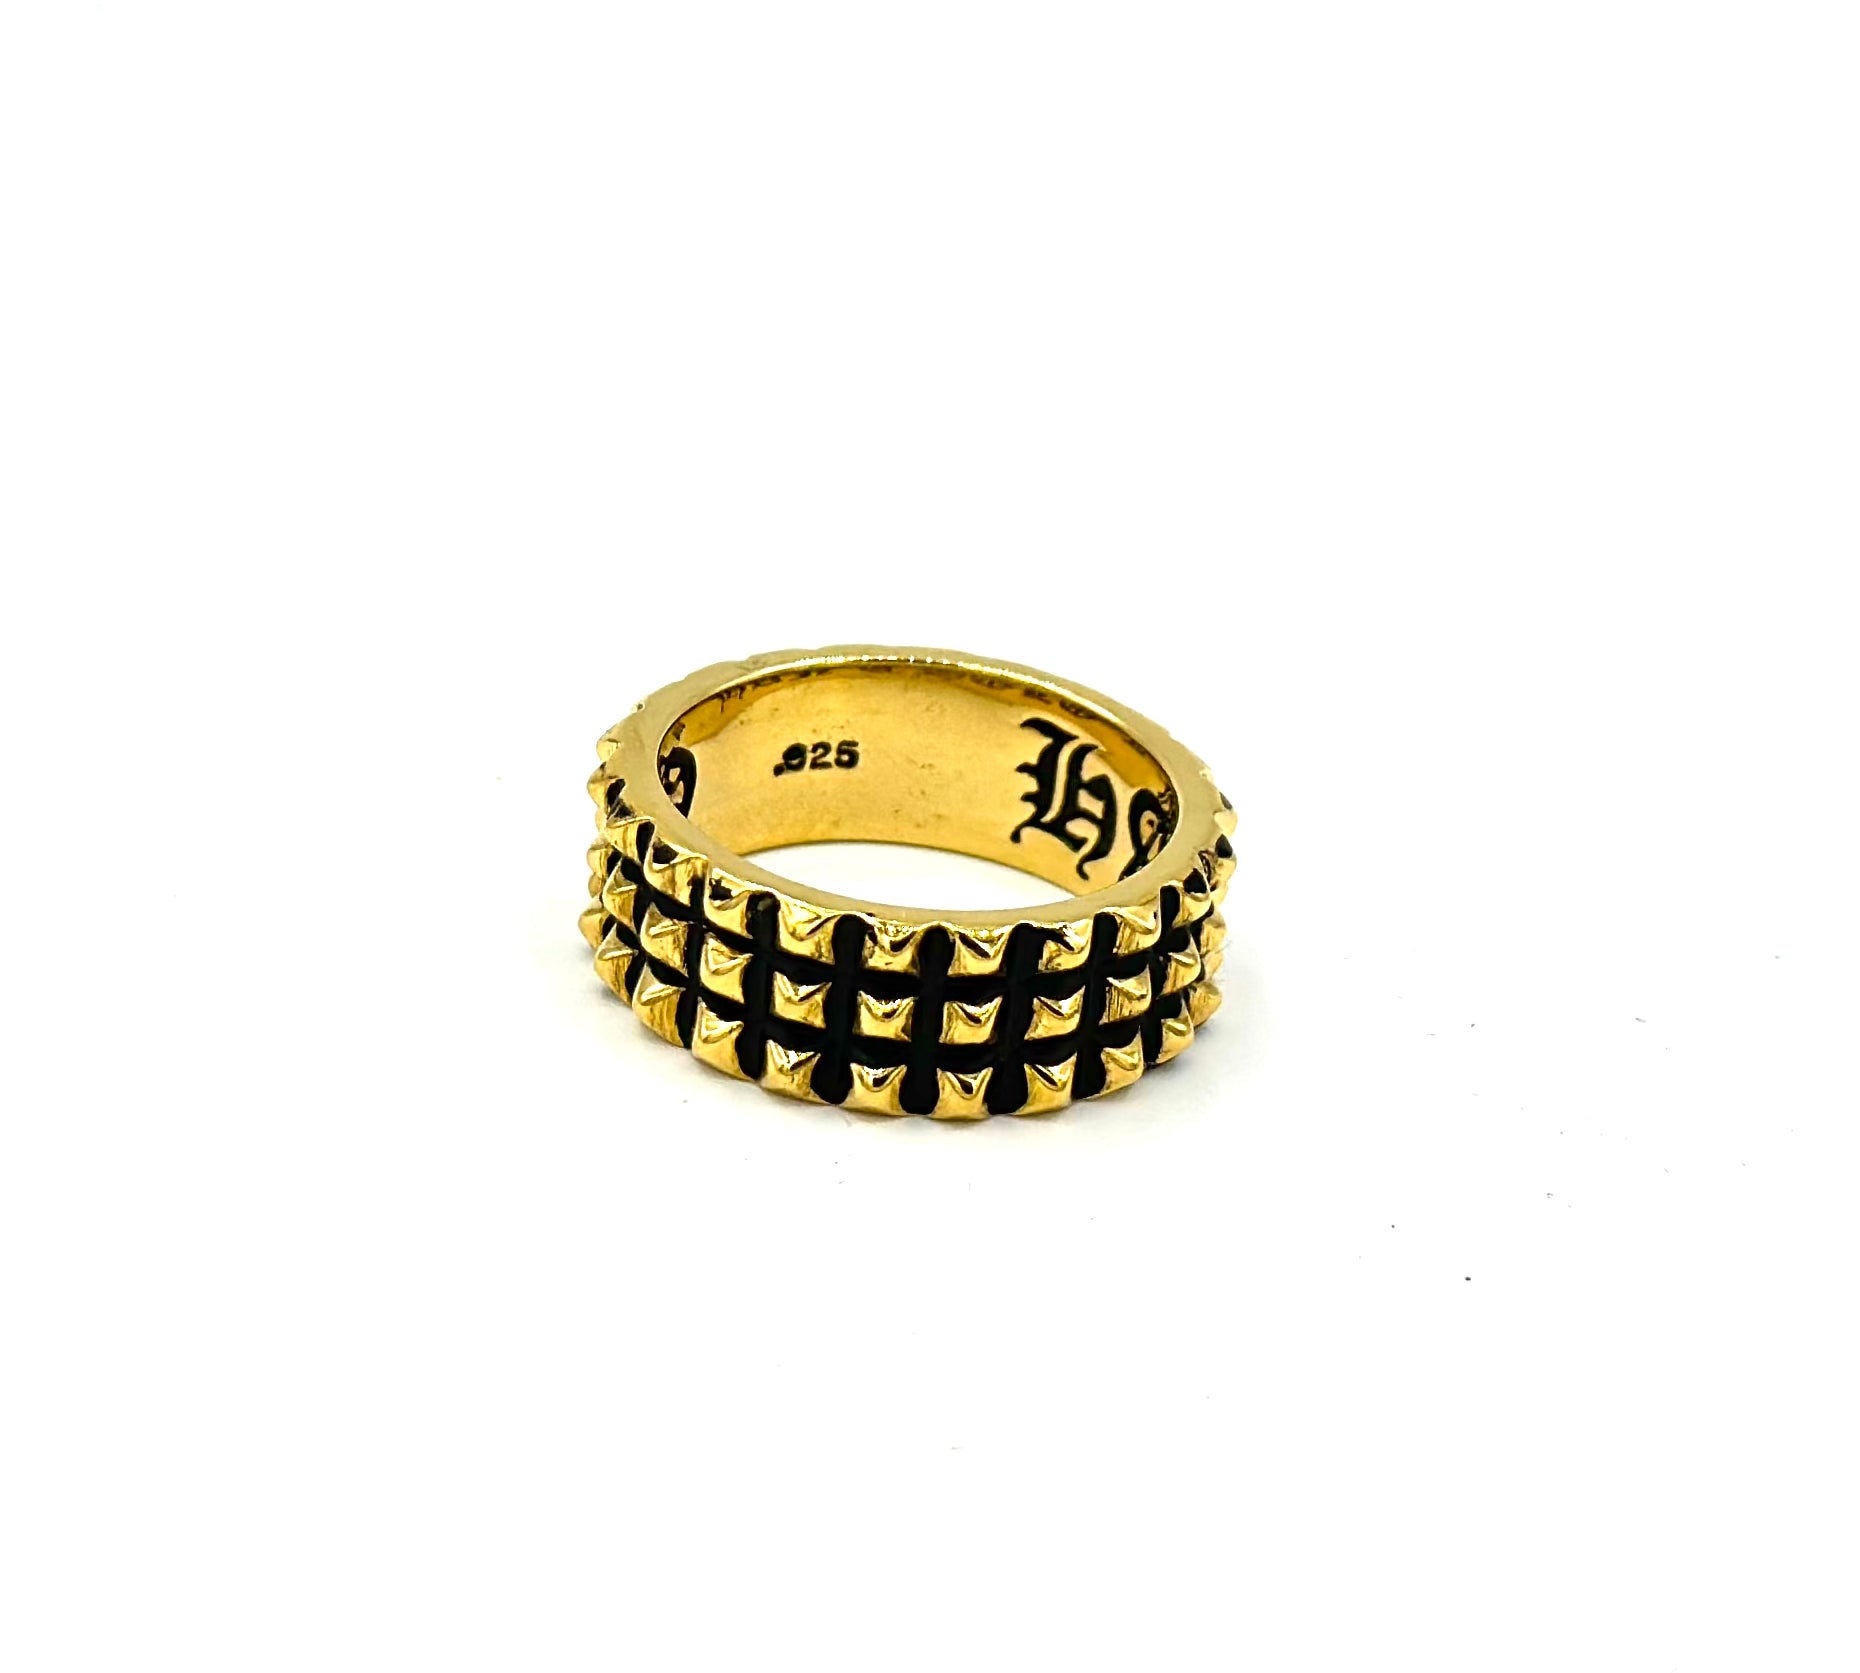 3 Row Spike Ring pm rings Precious Metals Vermeil - 24k Gold Plated 5 